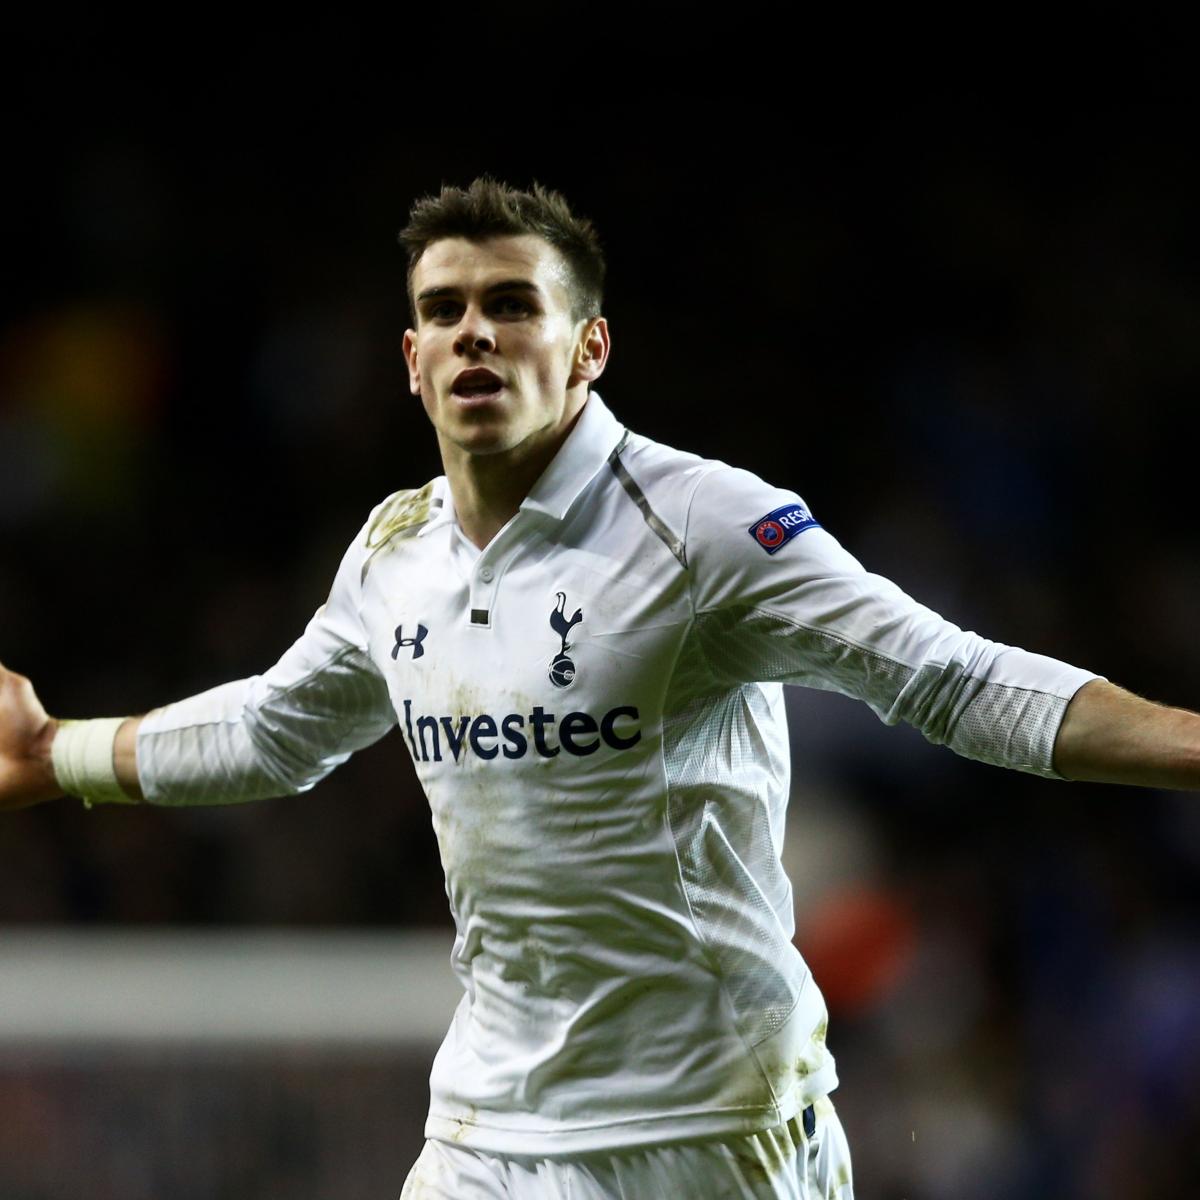 The Gareth Bale Season of 2012/13 at Spurs was one of the greatest the  Premier League has seen